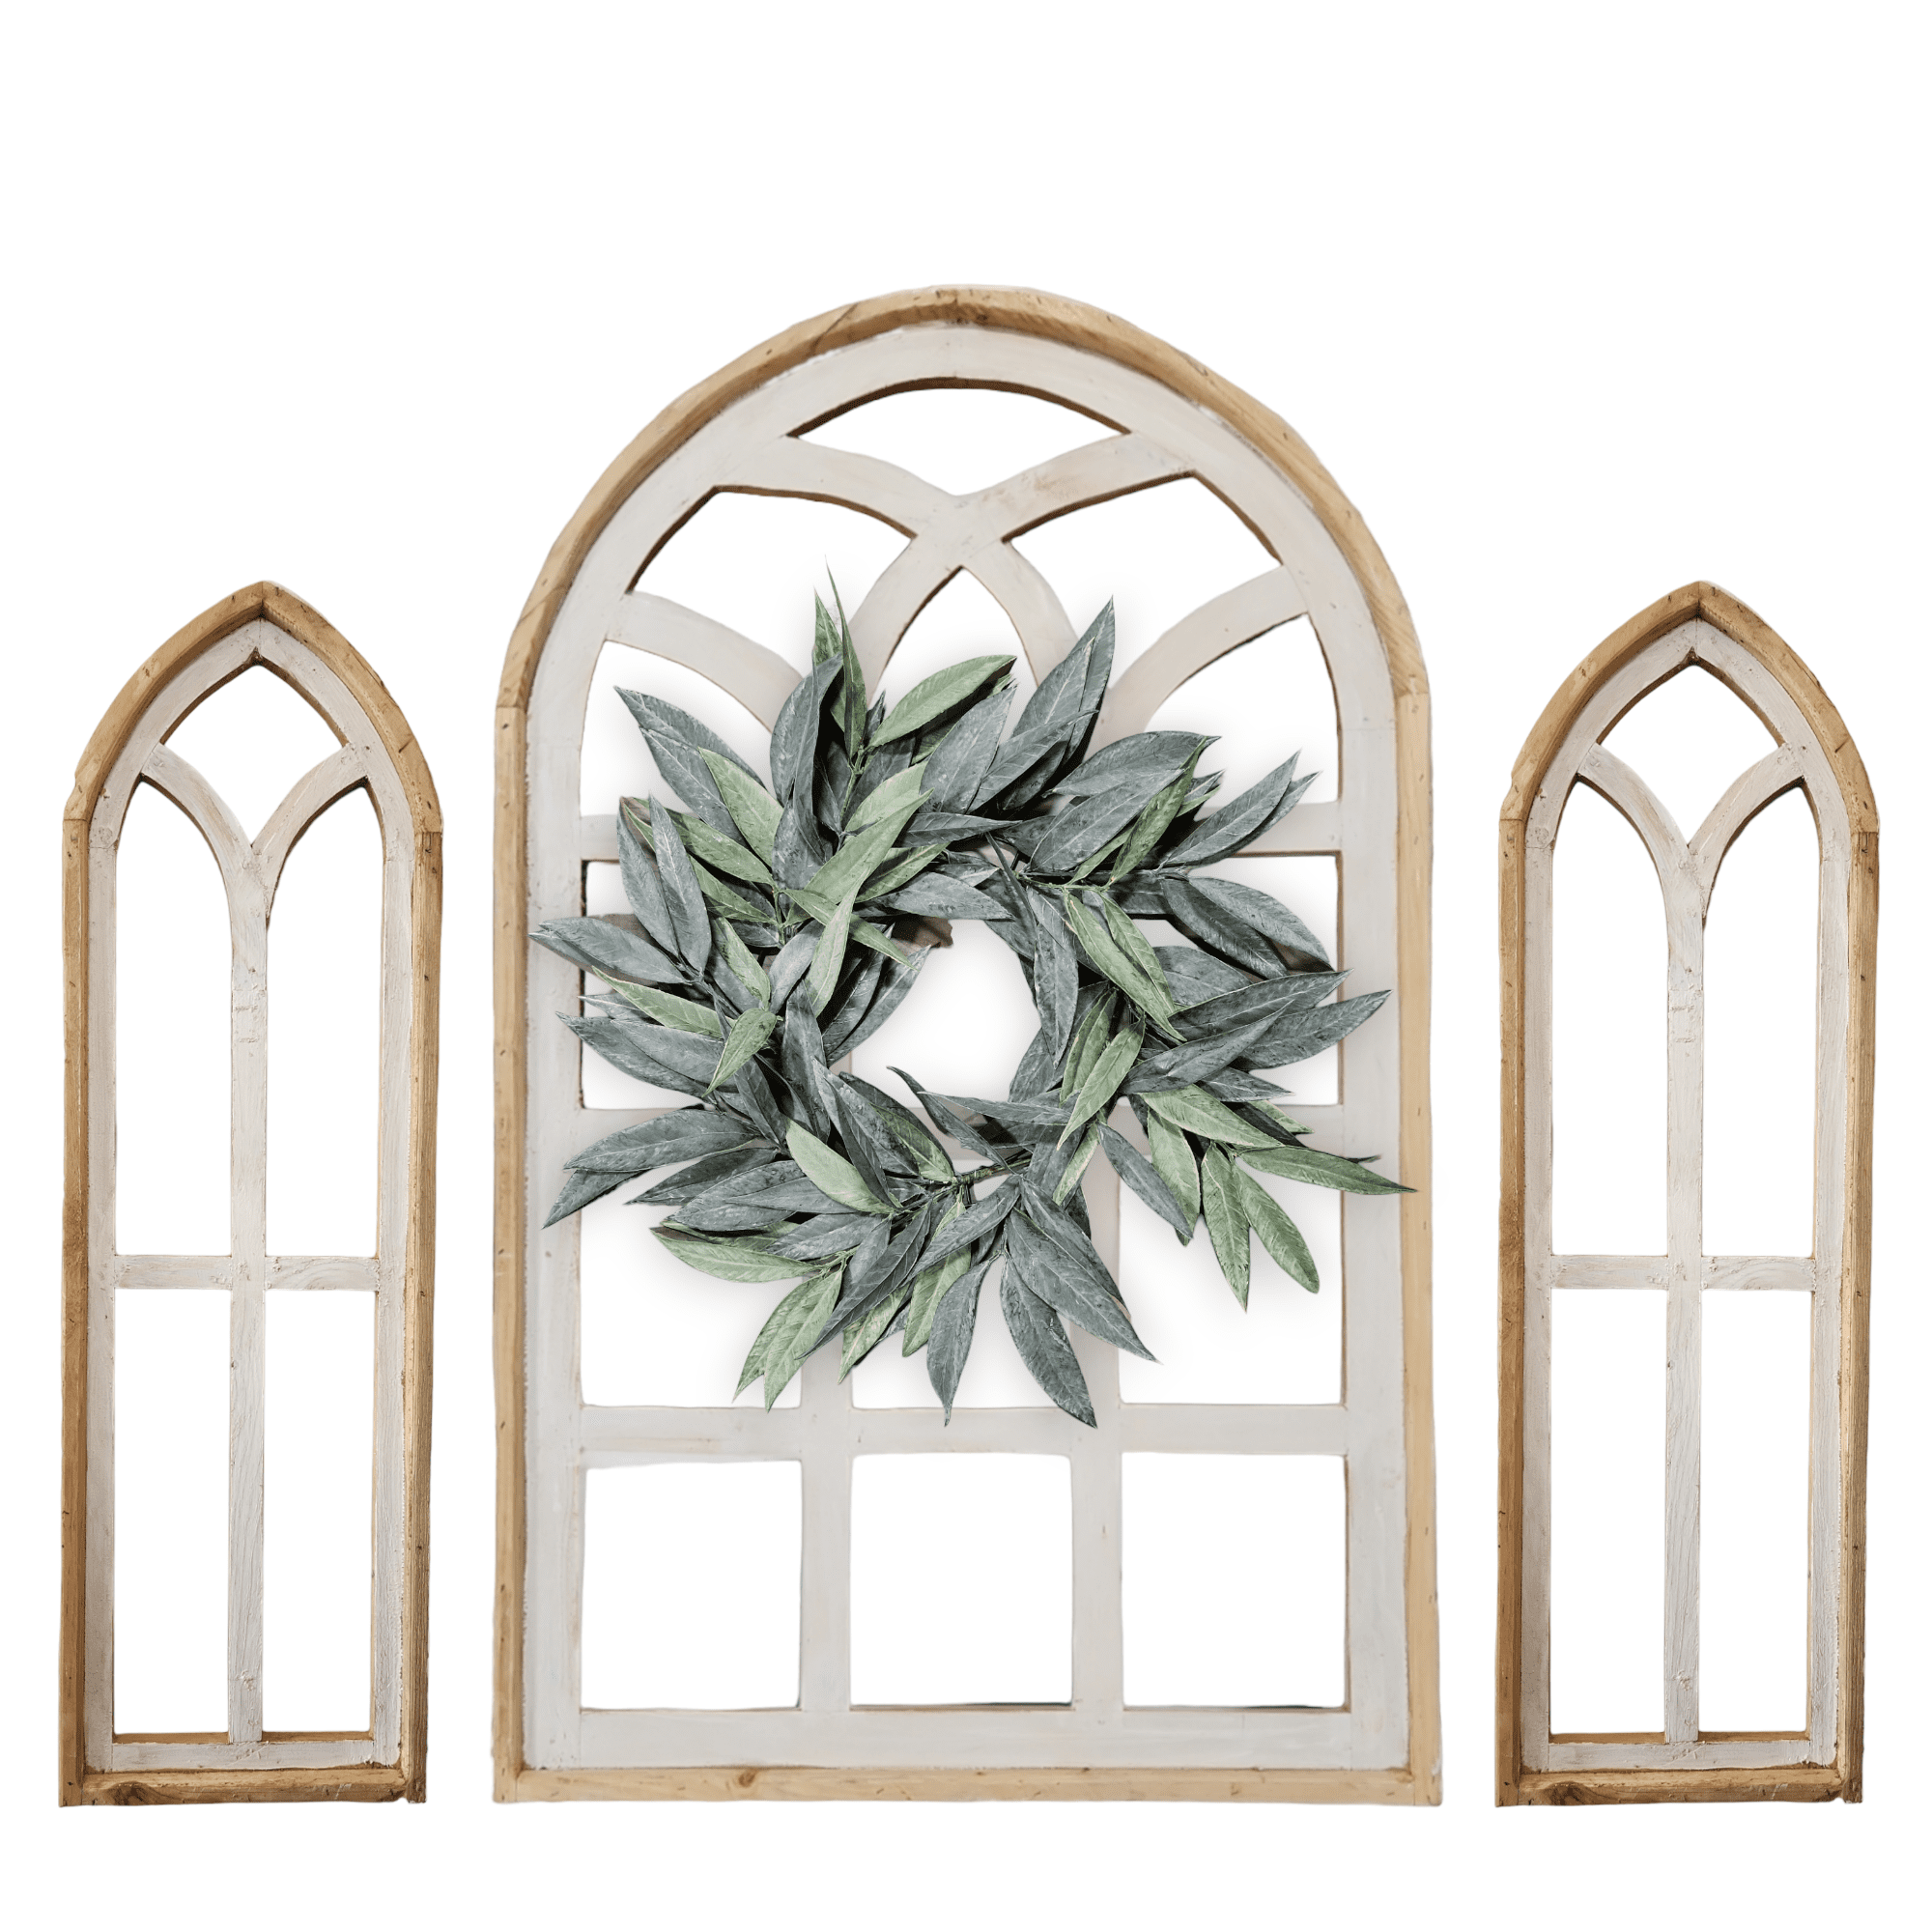 Set of 3 Farmhouse Wooden Paradise Window Collection- The Paradise Collection- Window Arches Farmhouse Wood Cathedrals - Ranch Junkie Mercantile LLC